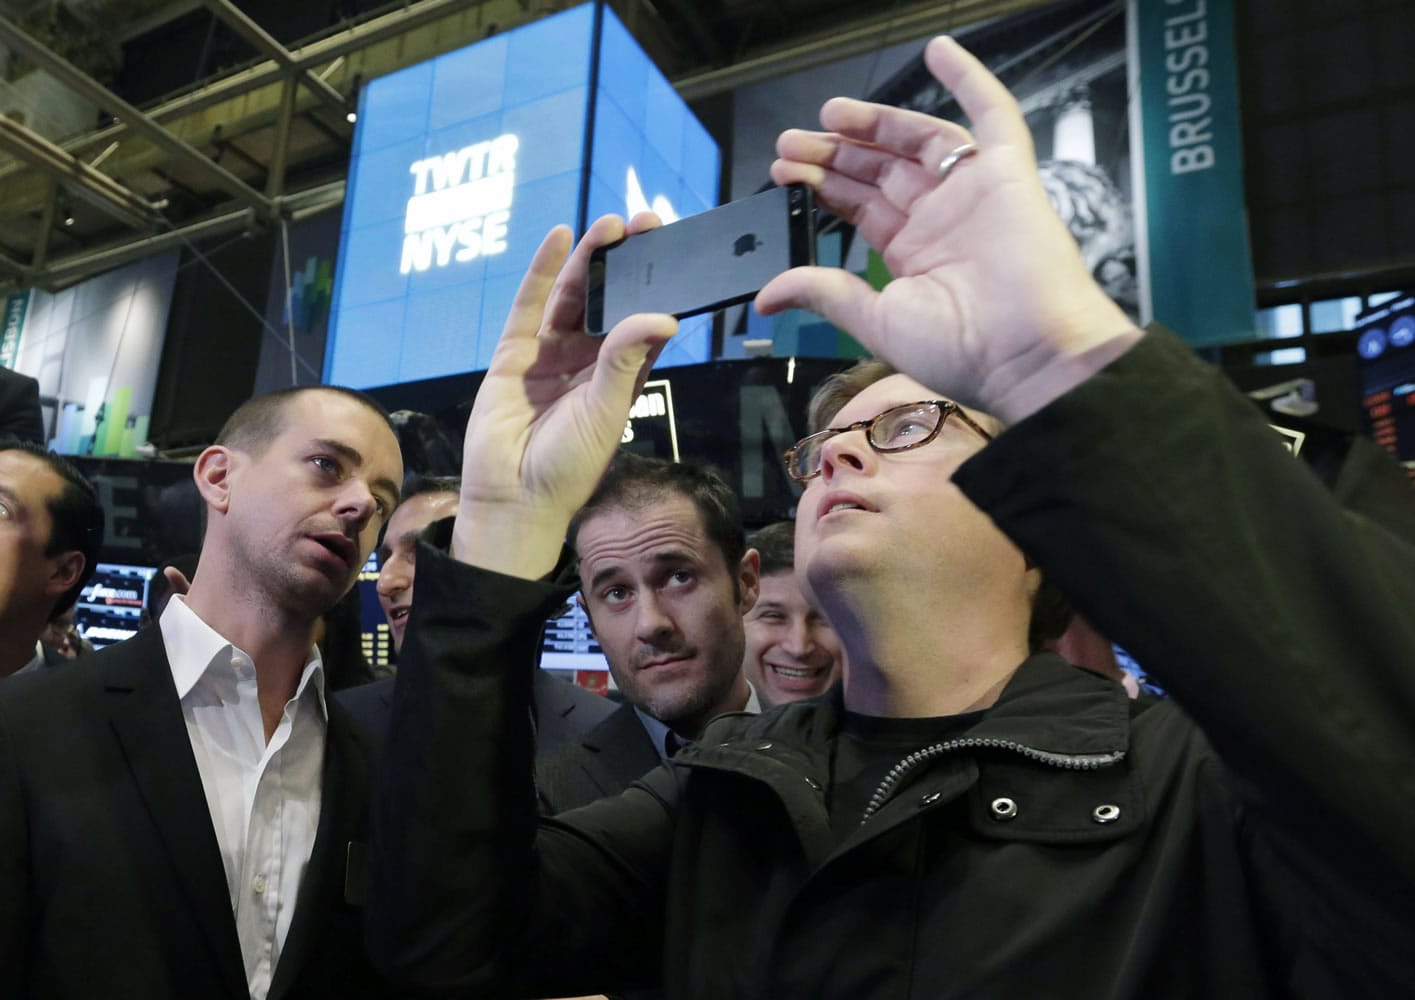 Twitter Chairman and co-founder Jack Dorsey, and co-founders Evan Williams and Biz Stone, wait for the opening bell to be rung at the New York Stock Exchange on Thursday.